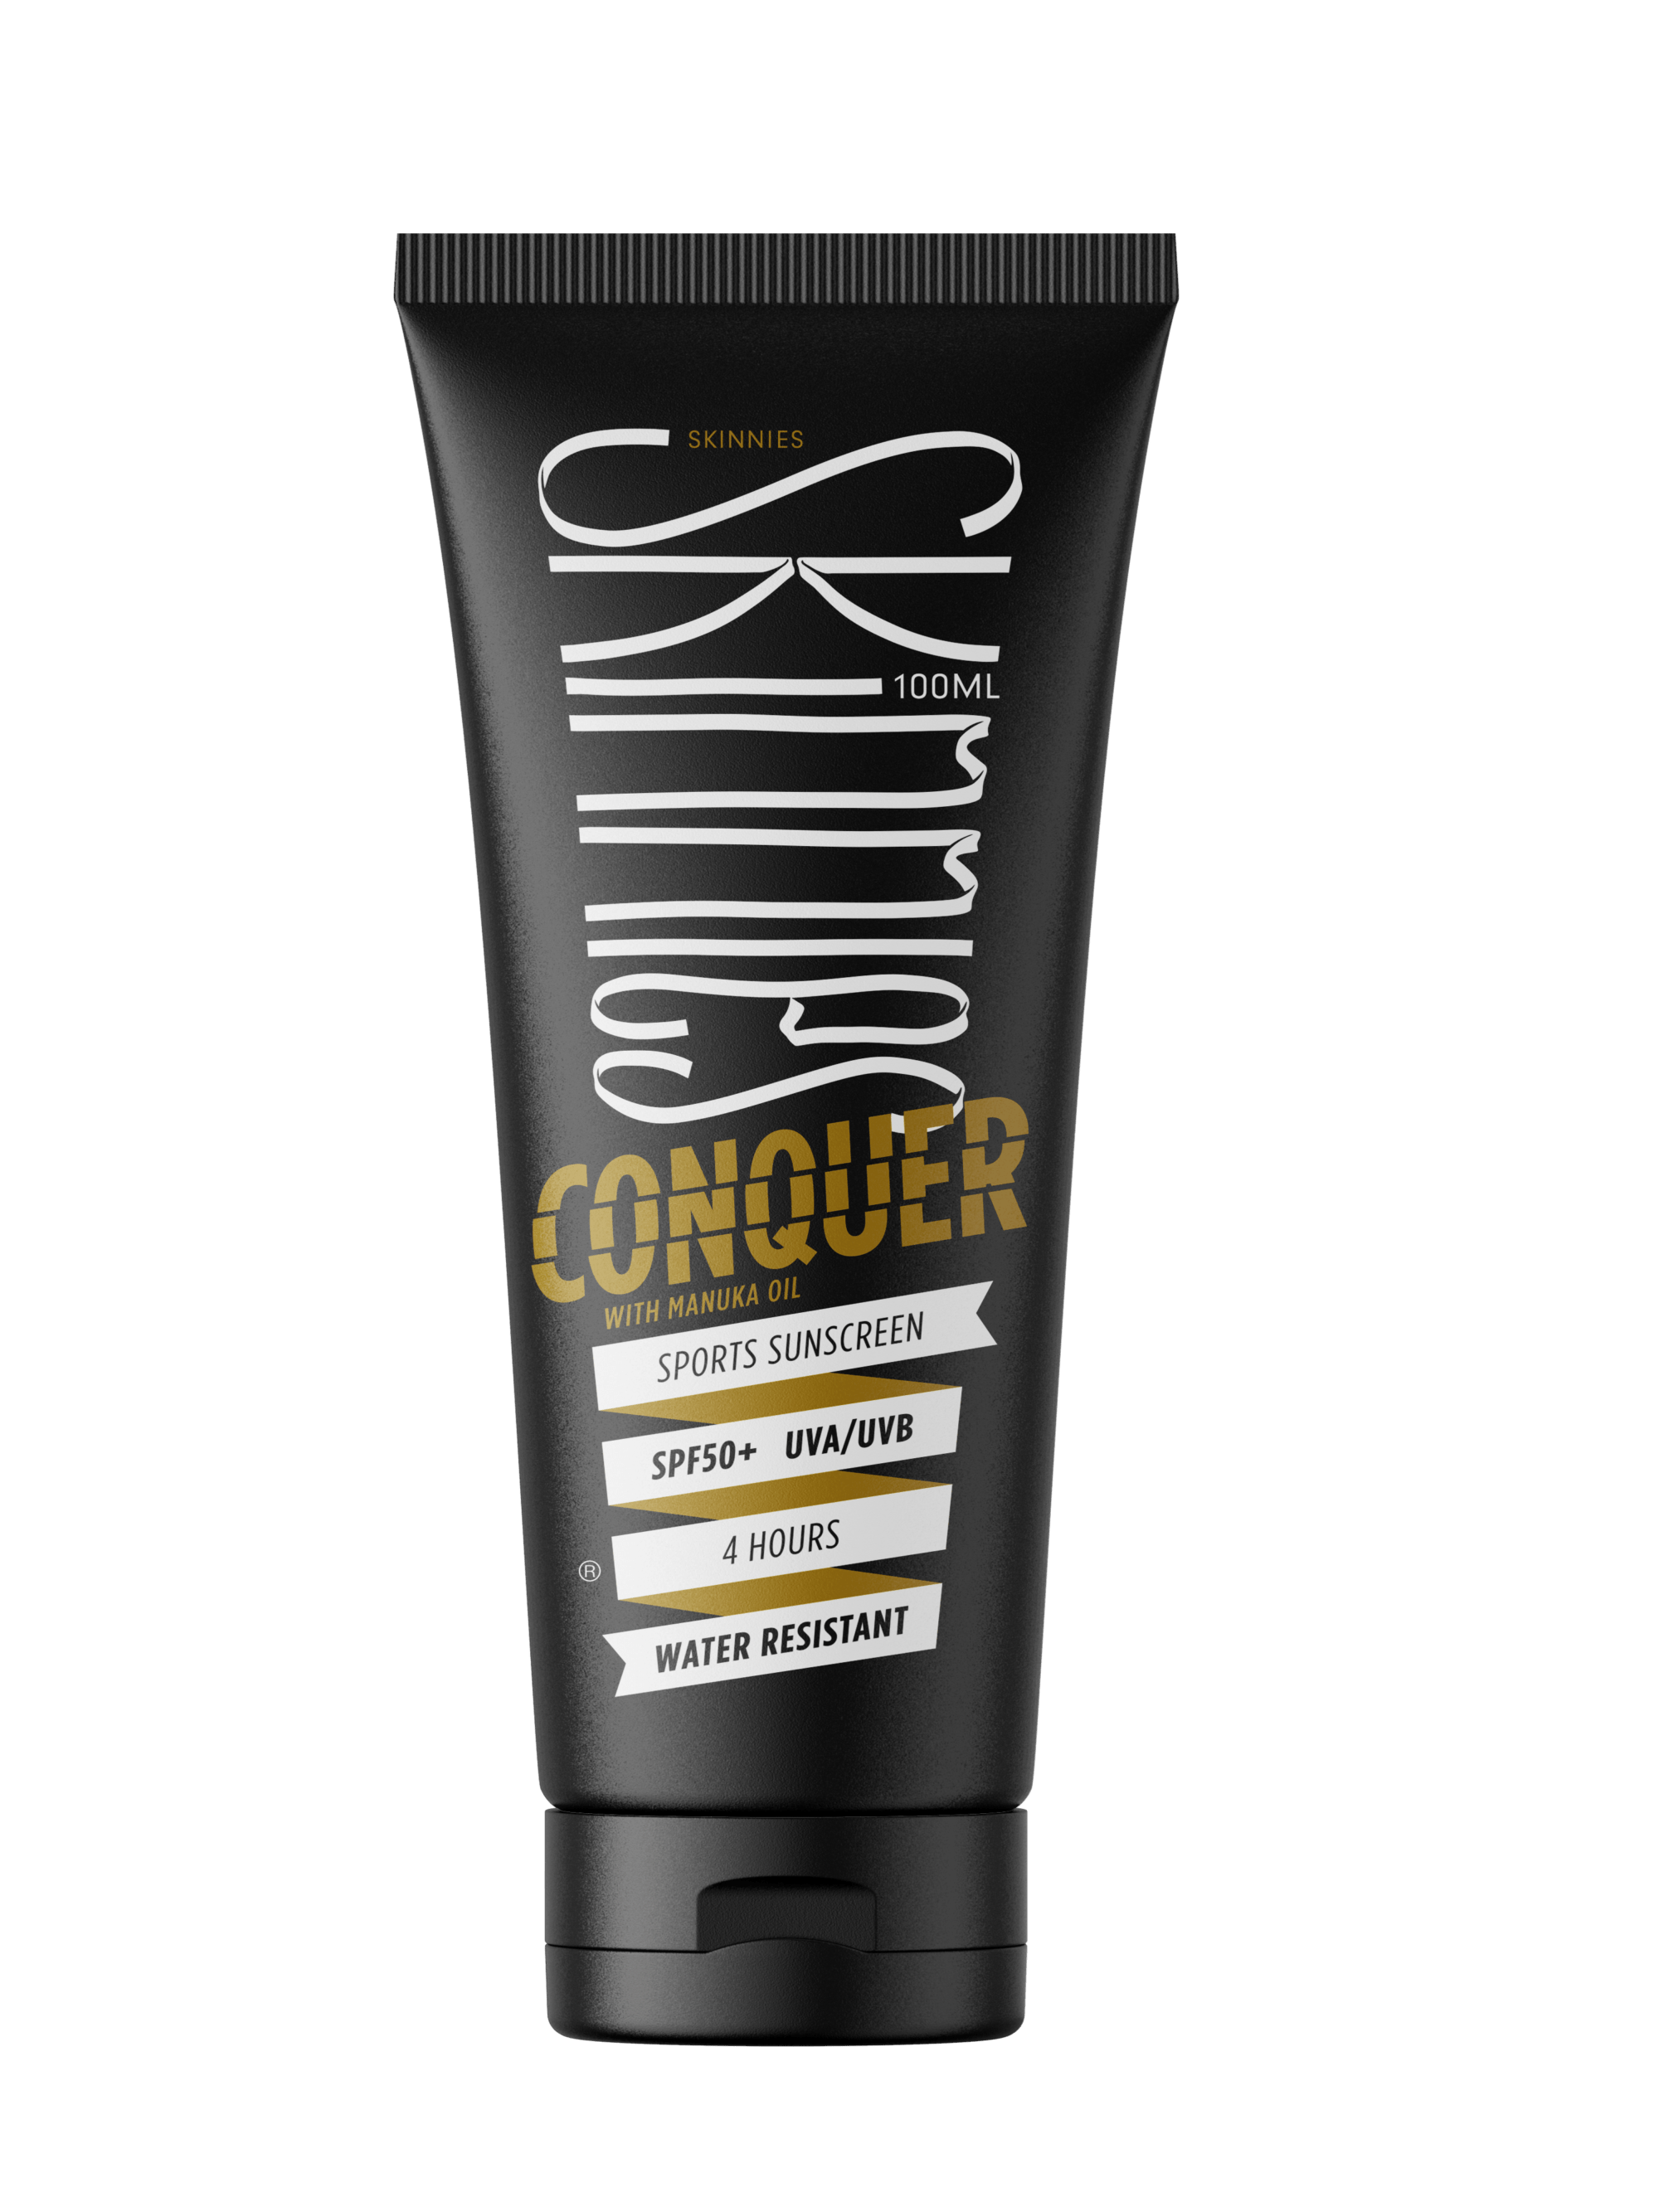 Product image from Skinnies - Sonnengel Conquer SPF50